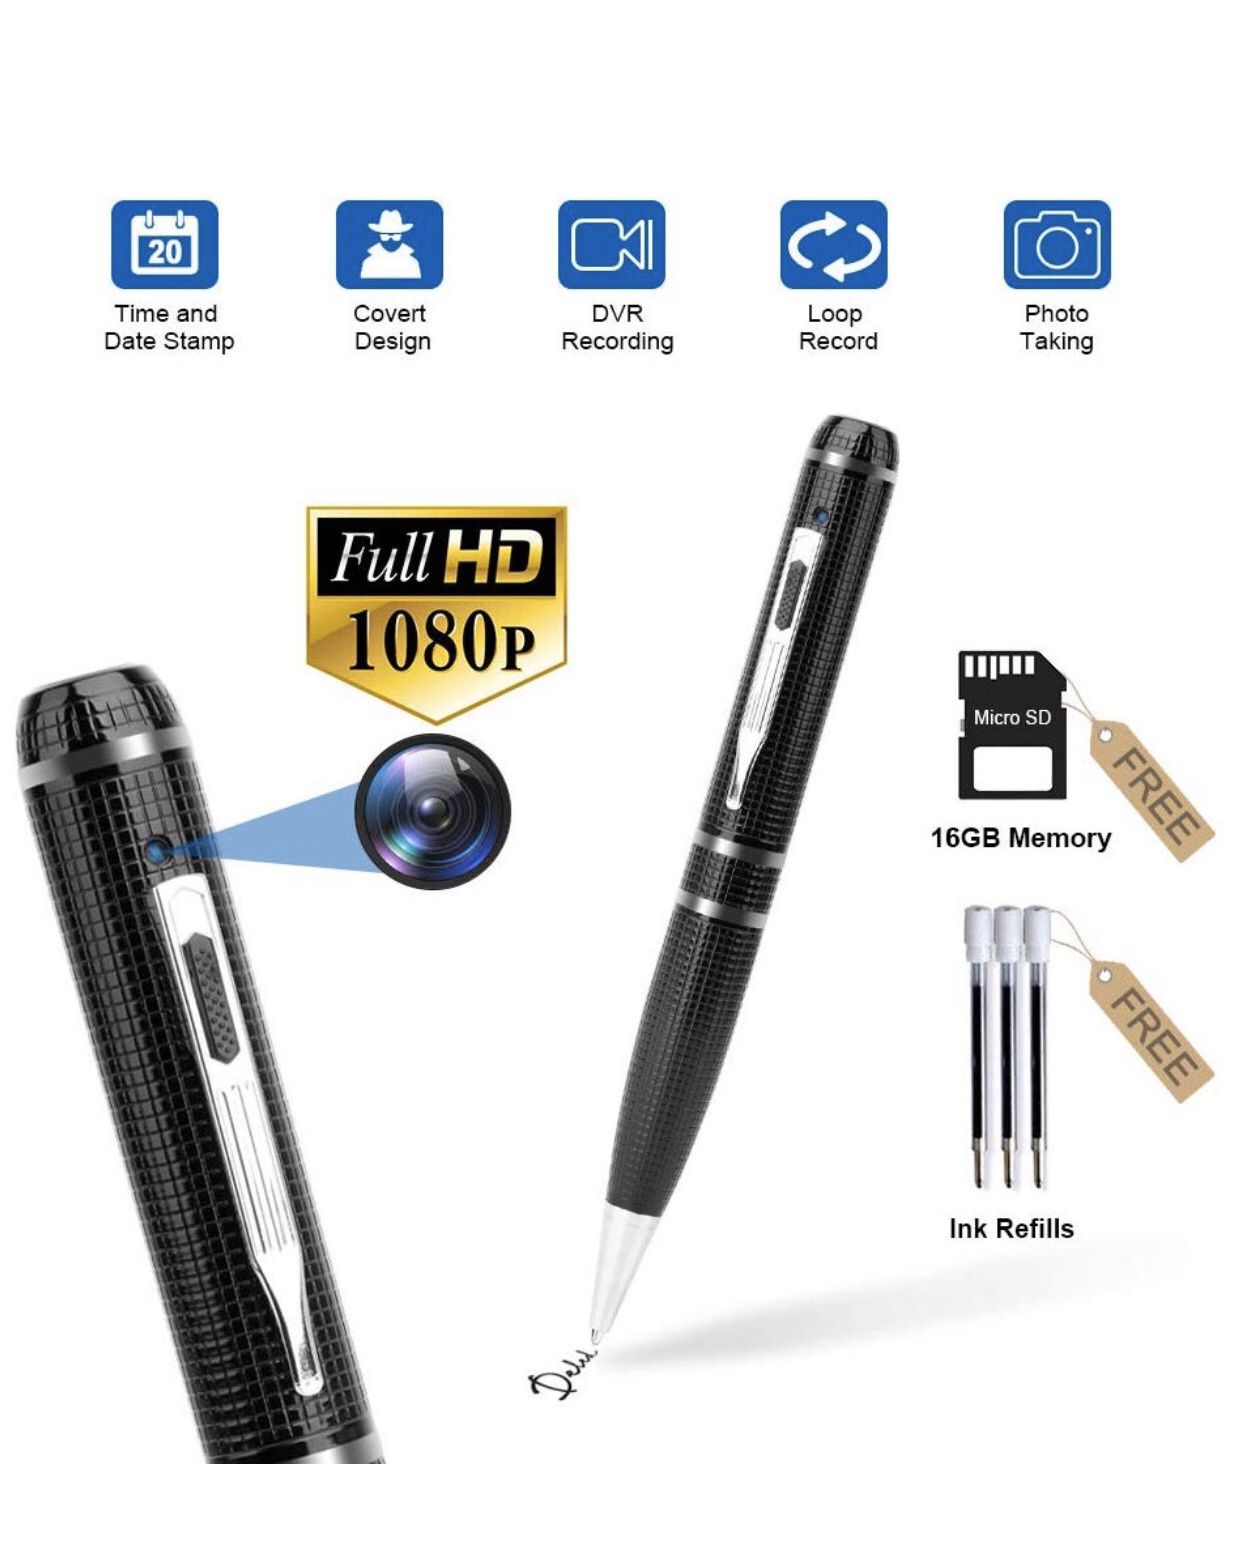 Hidden Camera Pen Recorder,FUVISION Spy Camera Pen Camcorder with Photo Taking,2 Hours Battery Life,Portable Digital Recorder with 16GB Memory and 3